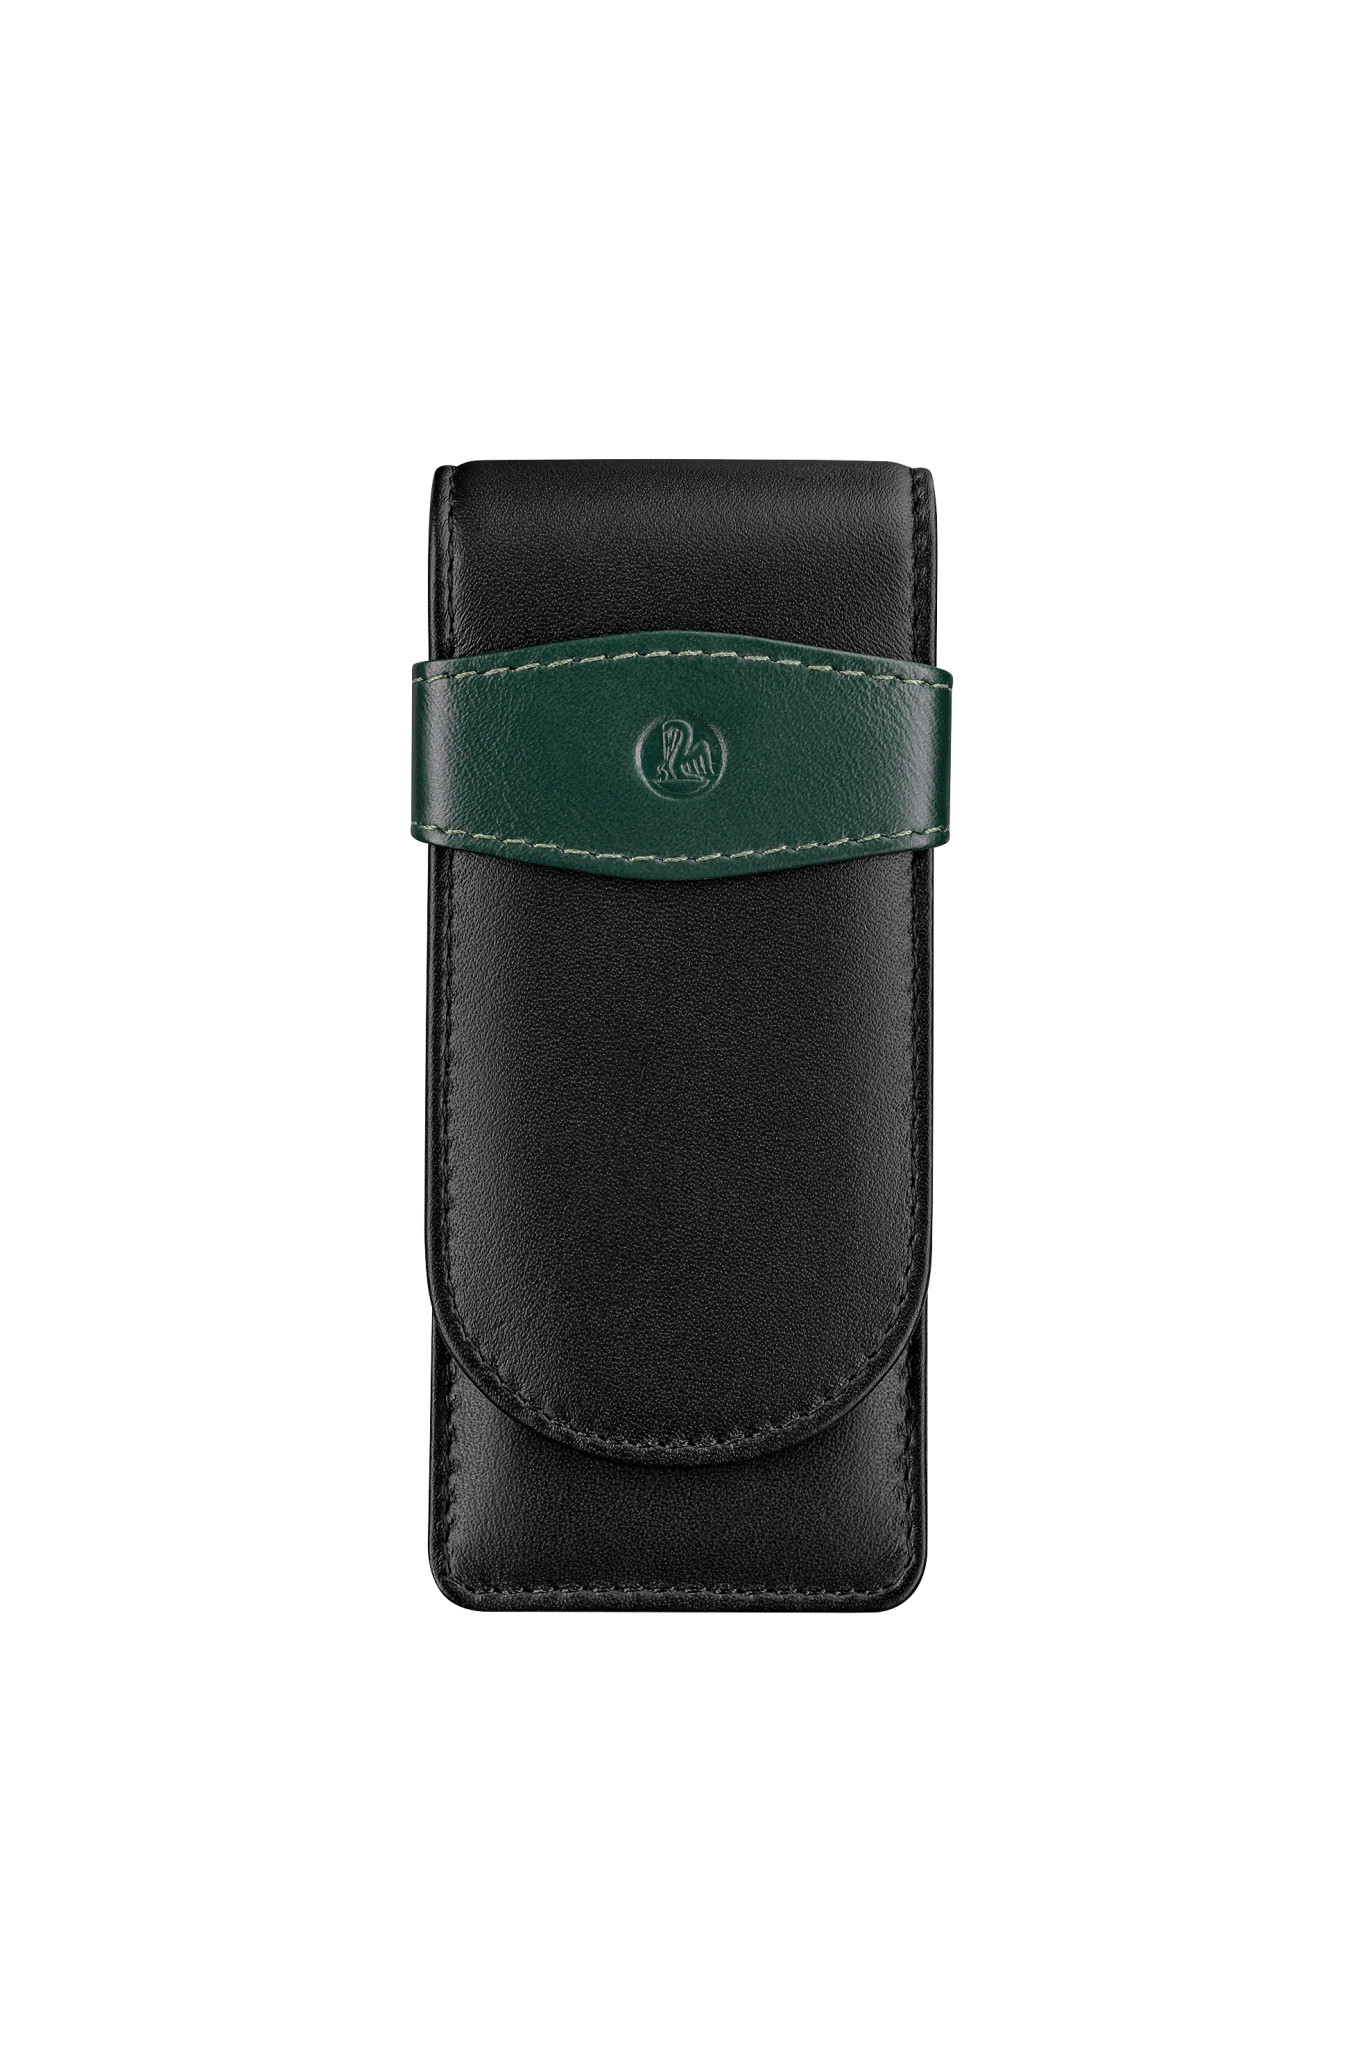 Pelikan Leather TG 32 Writing Implement Case For Three Writing Implements, Black and Green